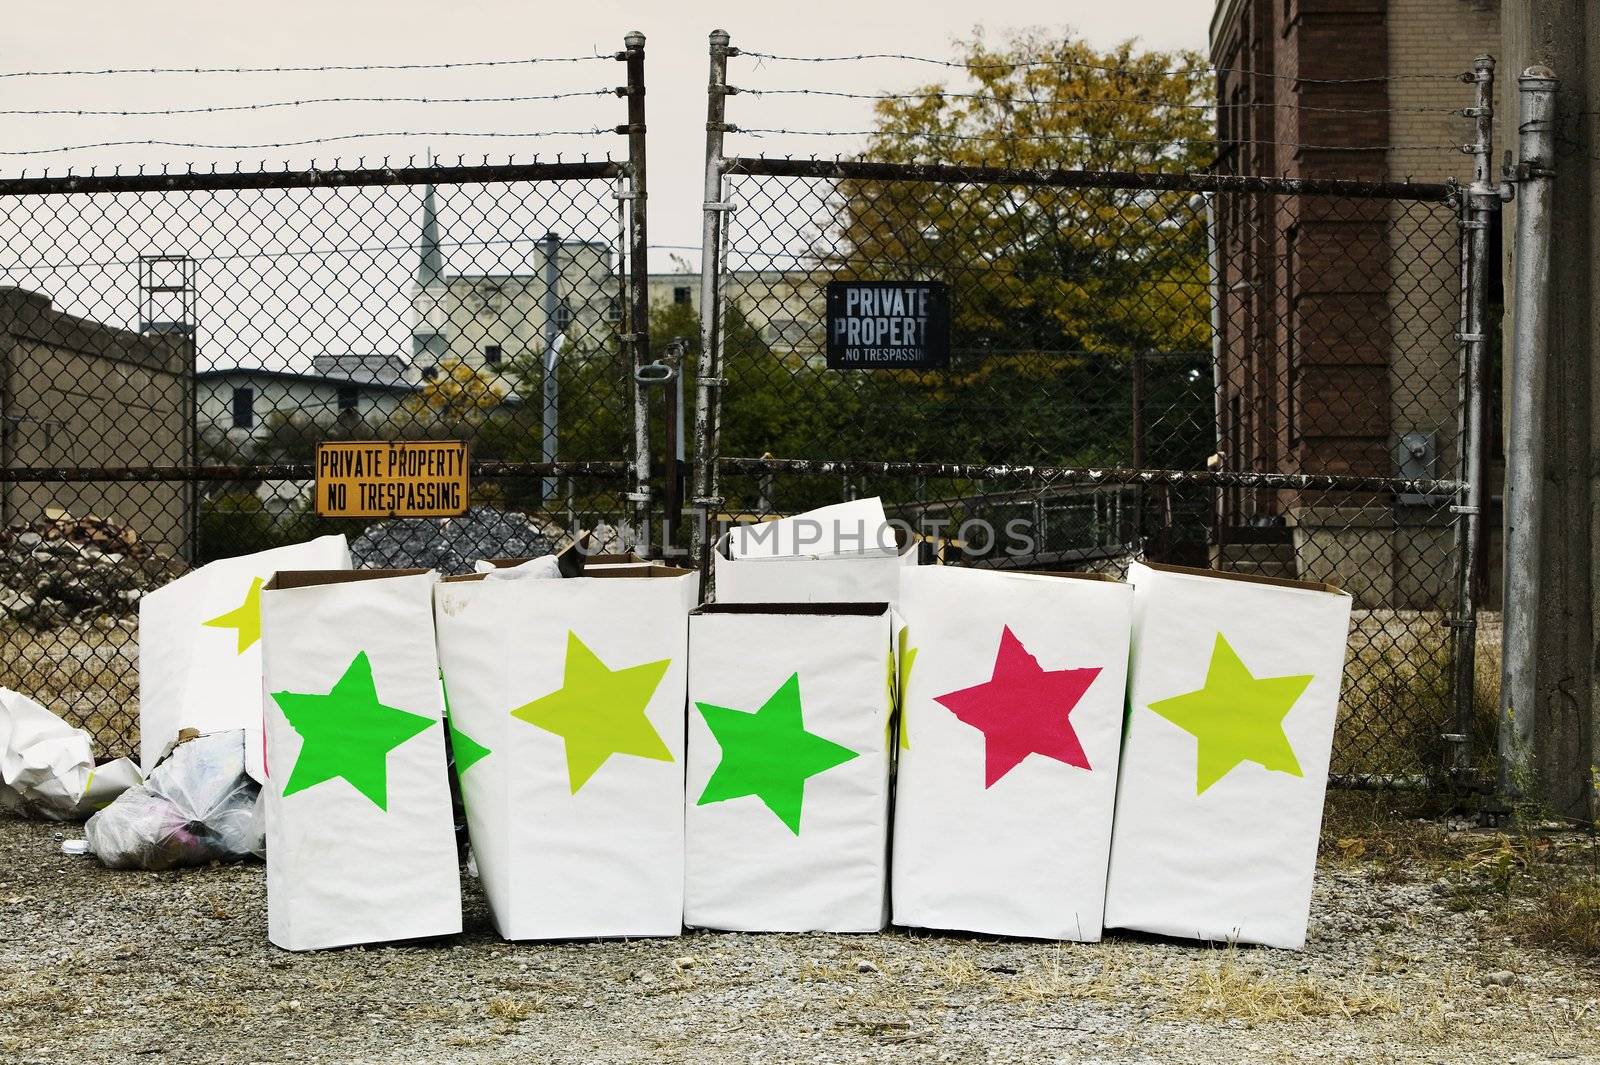 Trash boxes with brightly colored stars in front of a chain link fence.